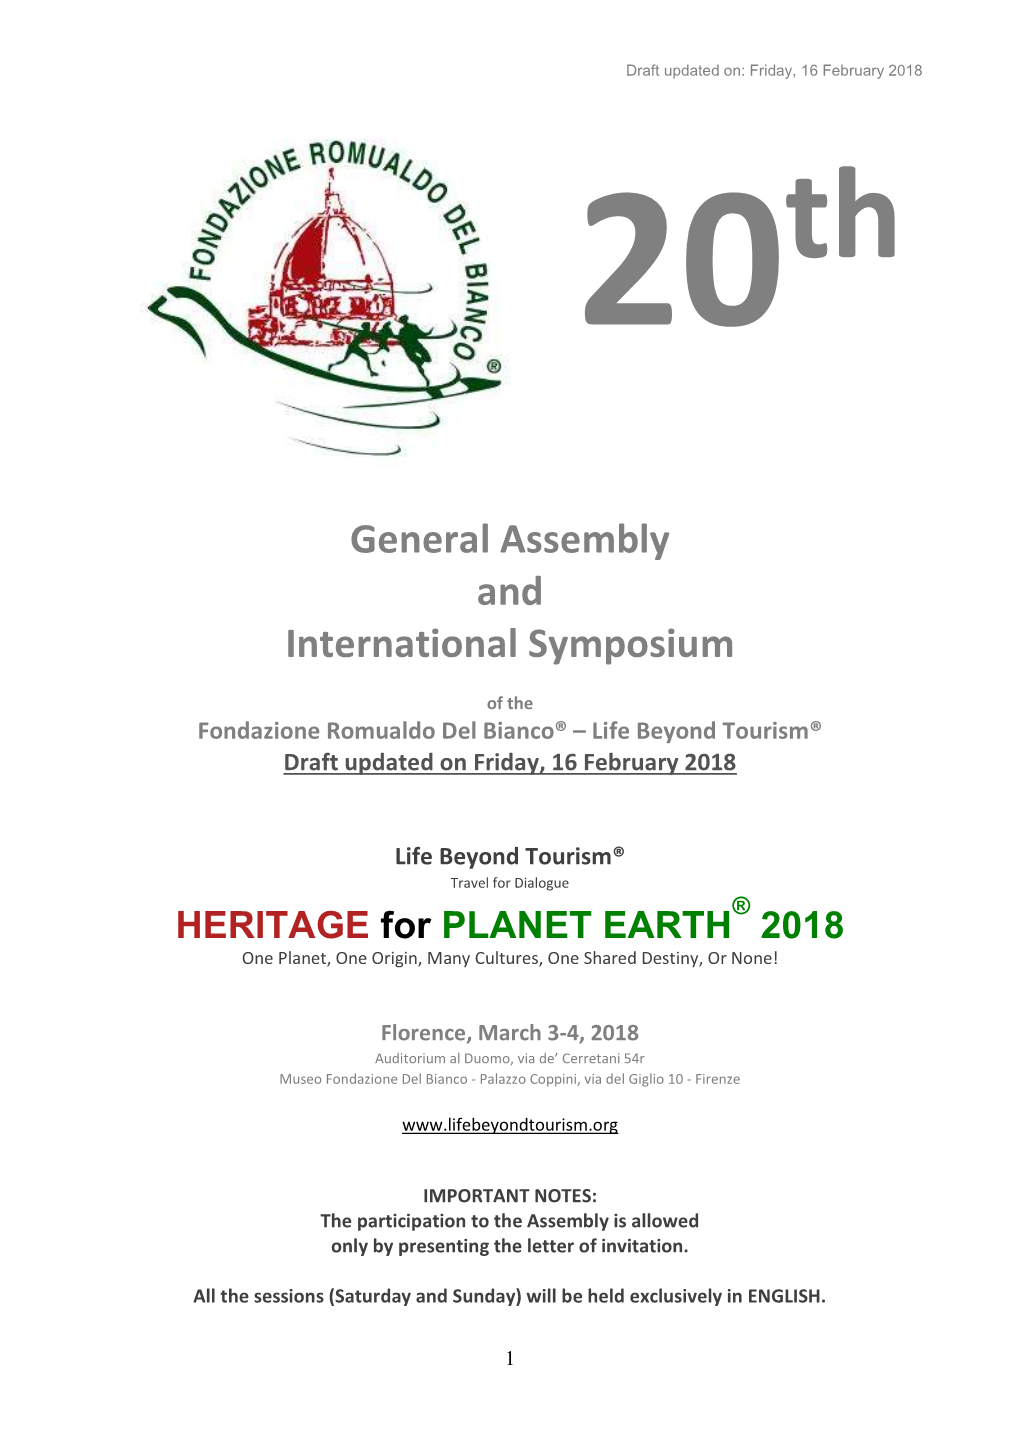 General Assembly and International Symposium